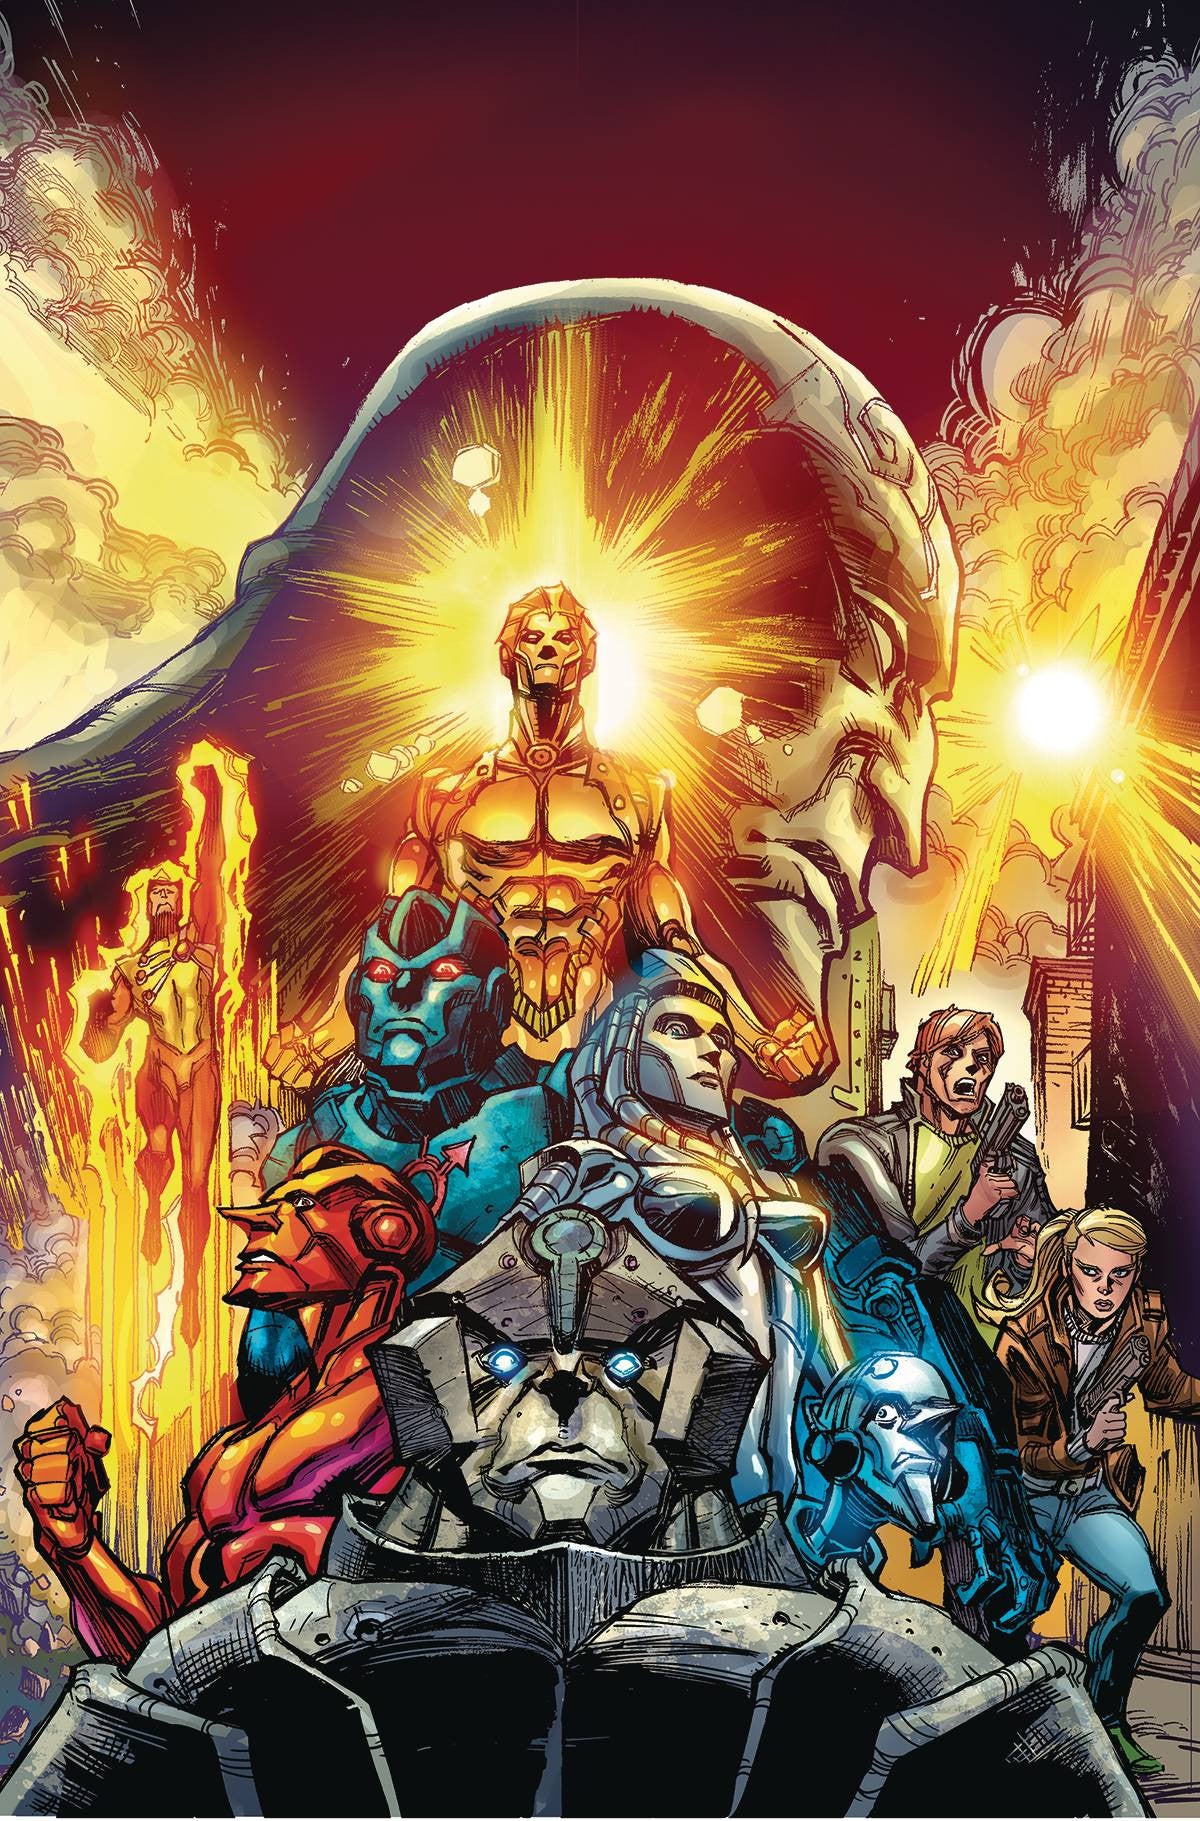 LEGENDS OF TOMORROW #5 COVER